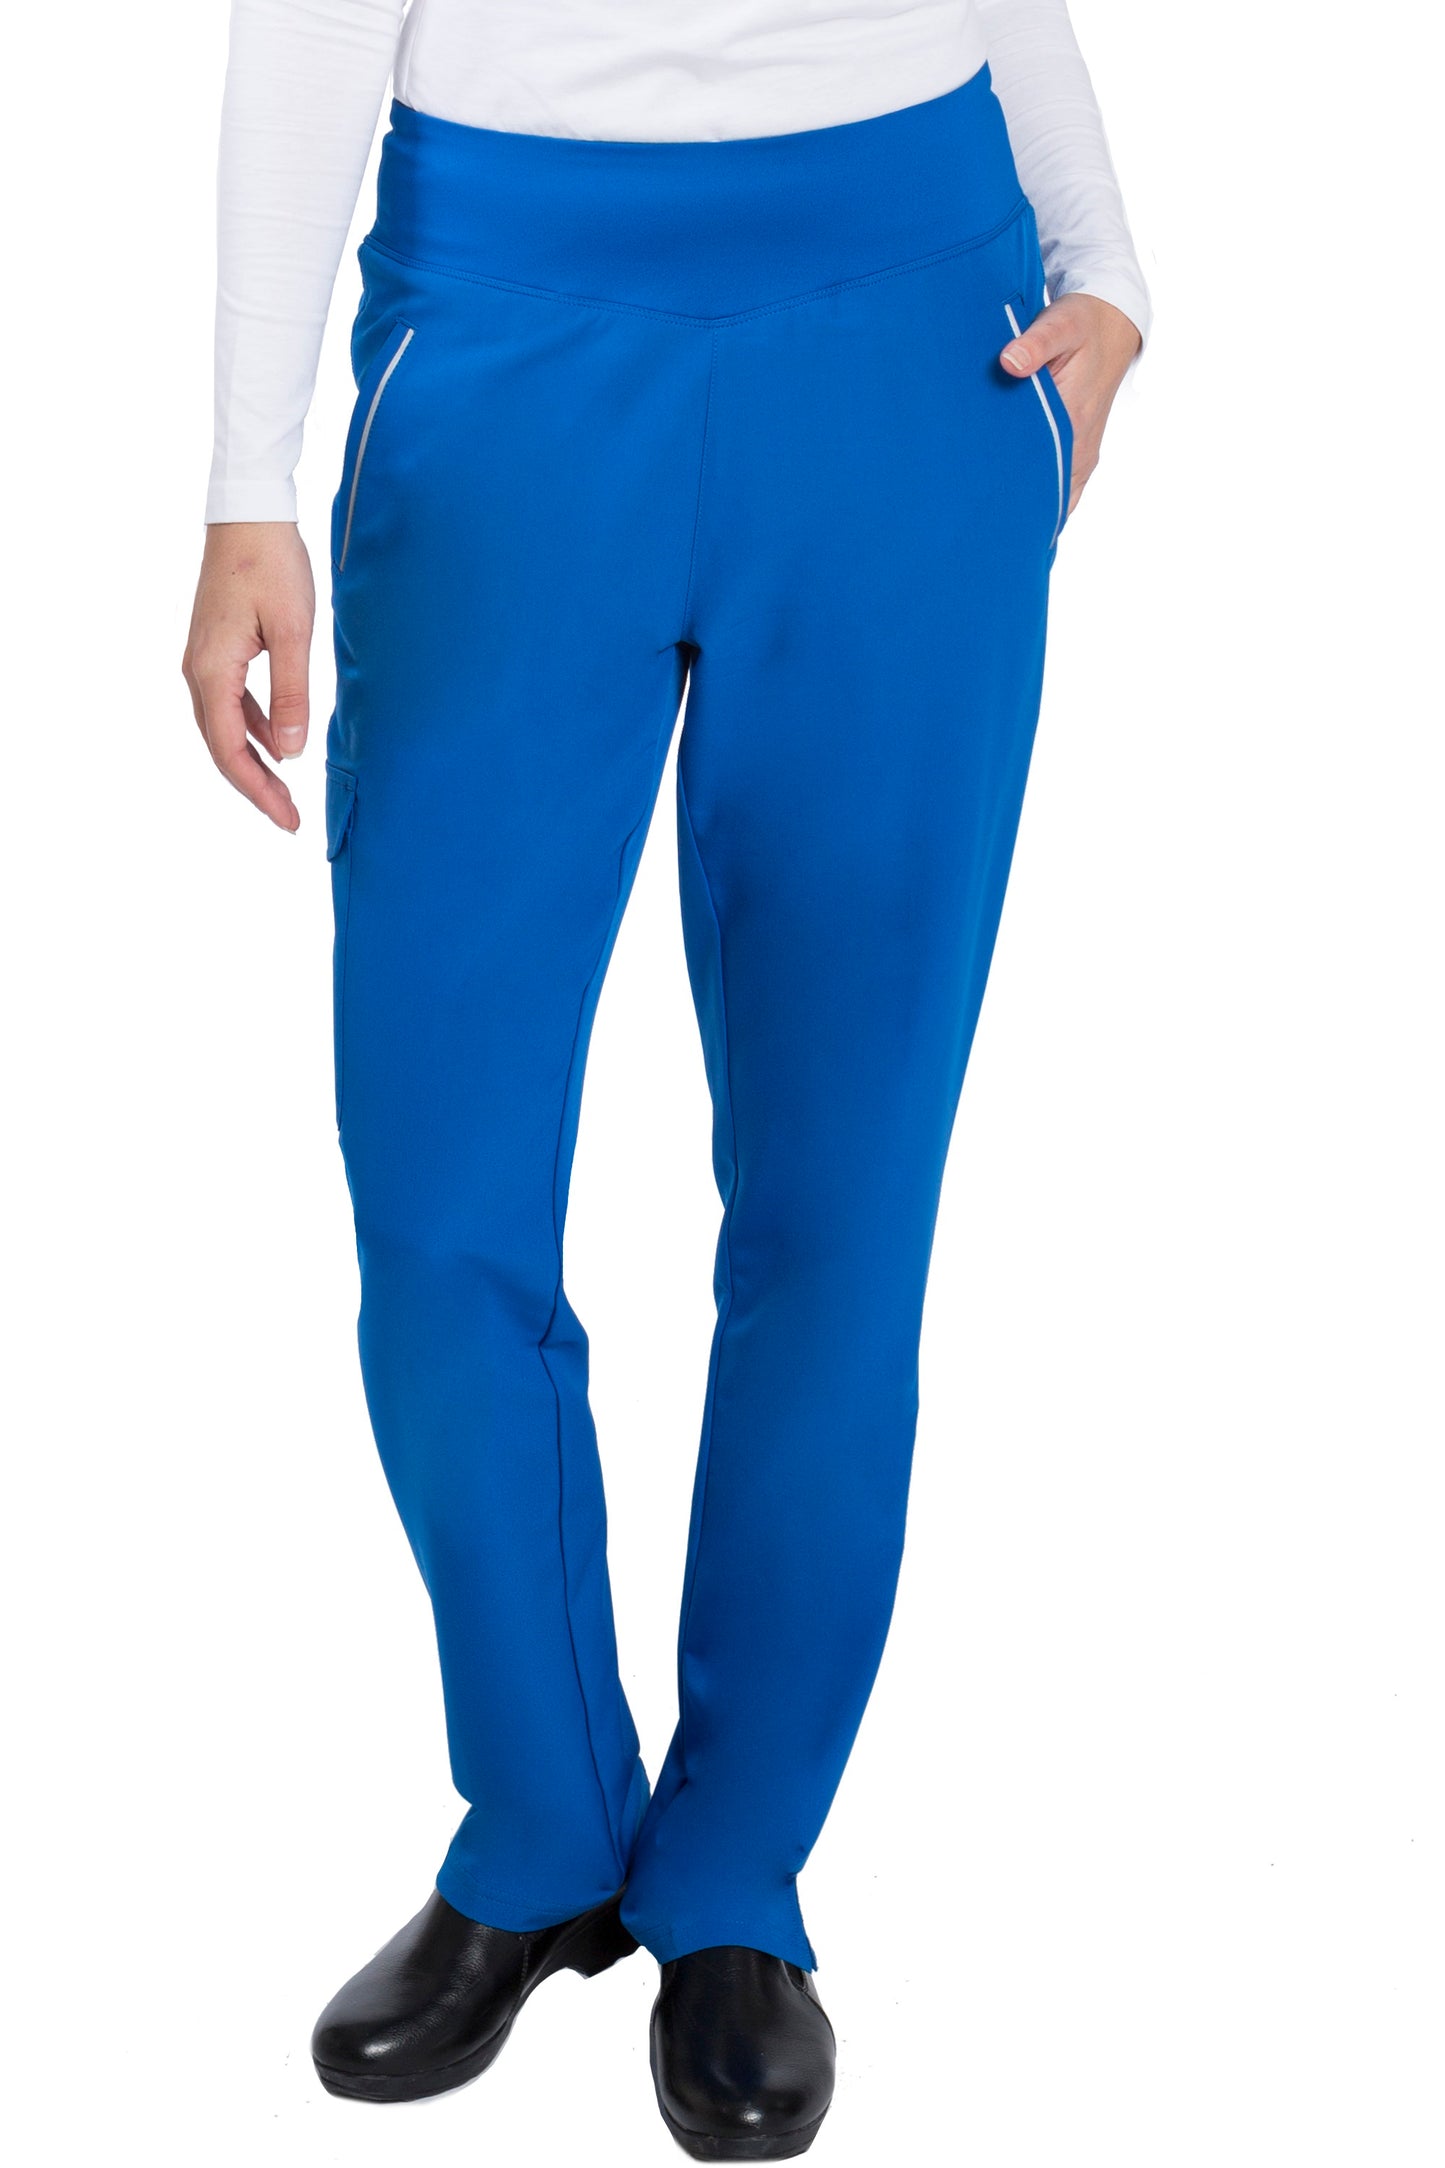 Healing Hands HH360 Naomi Yoga Waist Petite Scrub Pant in Royal at Parker's Clothing and Shoes.